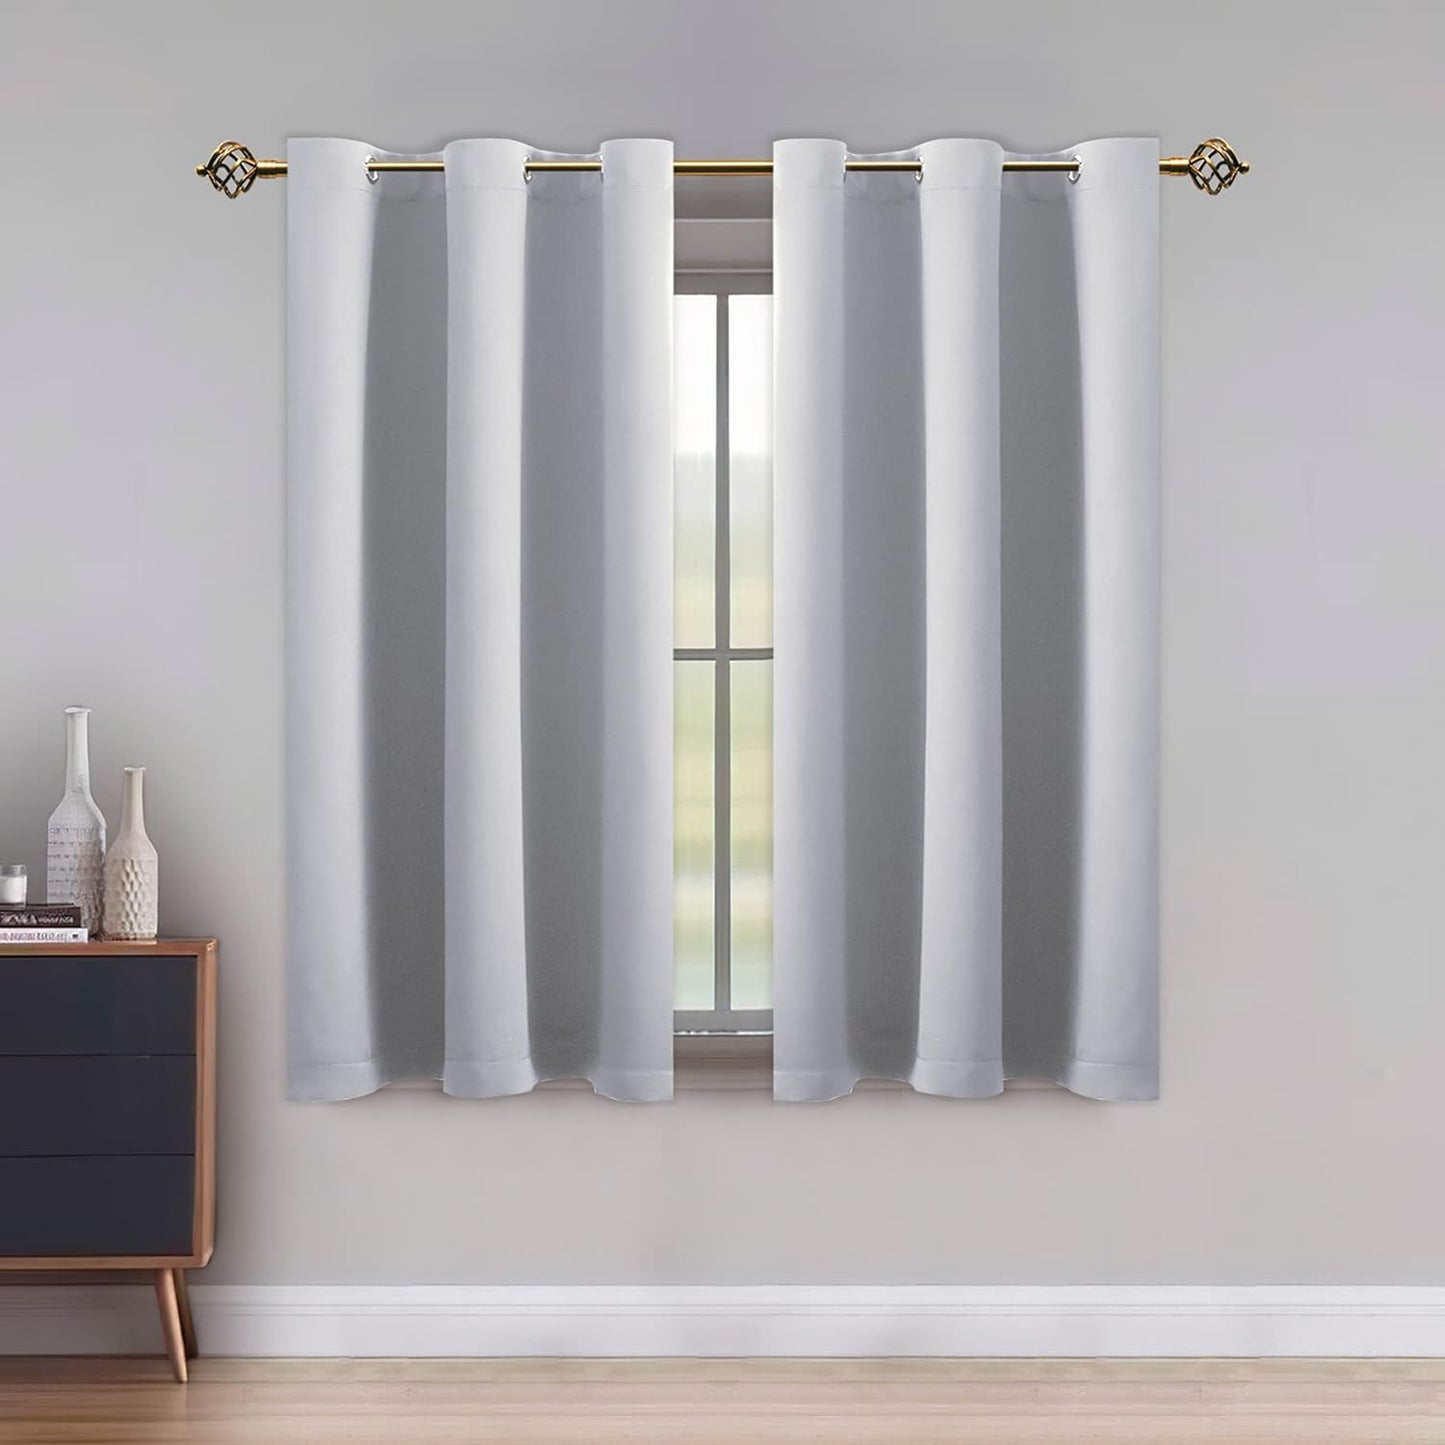 LUSHLEAF Blackout Curtains for Bedroom, Solid Thermal Insulated with Grommet Noise Reduction Window Drapes, Room Darkening Curtains for Living Room, 2 Panels, 52 X 63 Inch Grey  SHEEROOM Silver Grey 42 X 54 Inch 